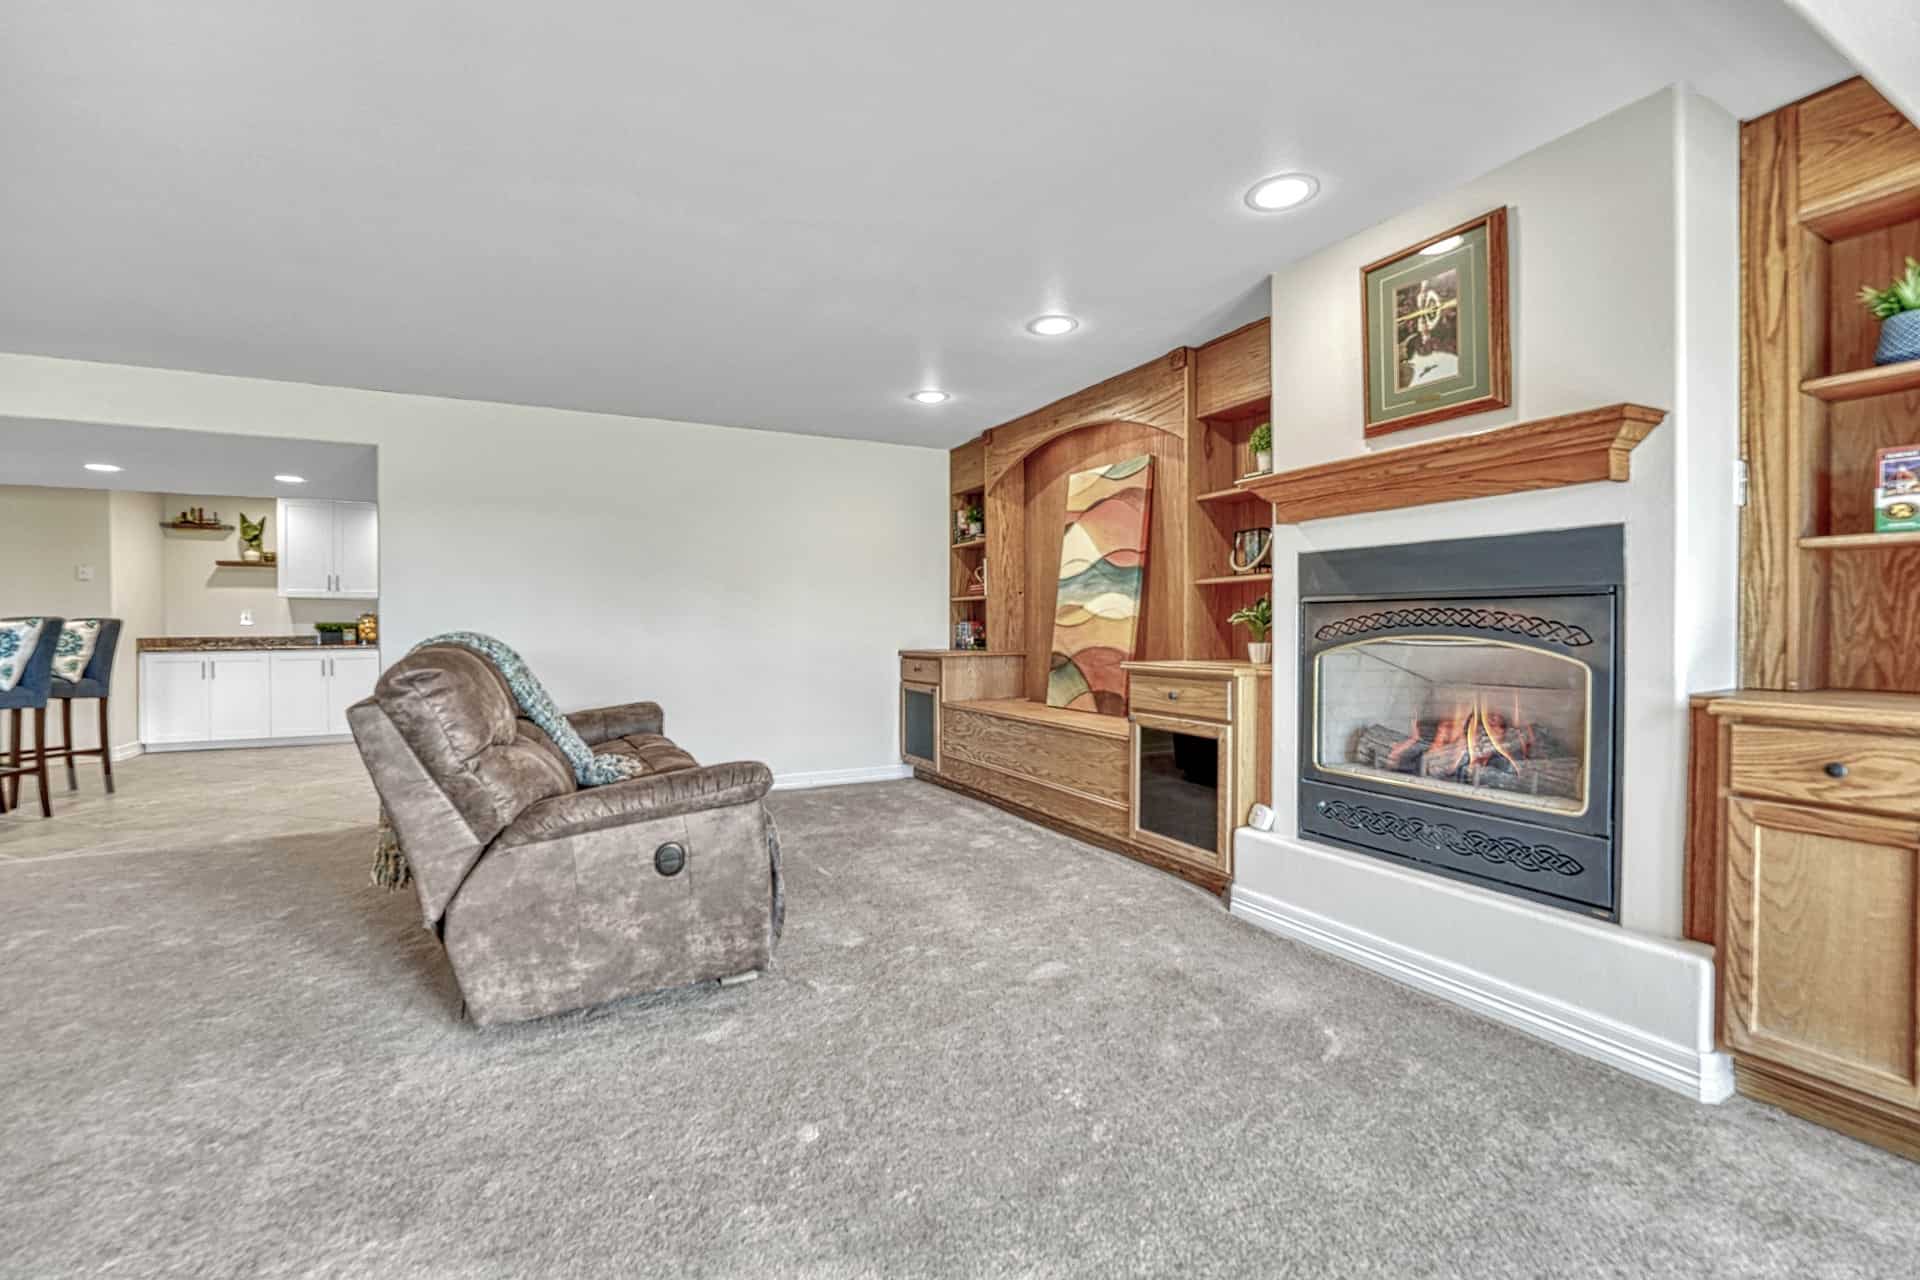 Basement TV Area with Built In Enterainment Center and Gas Log Fireplace